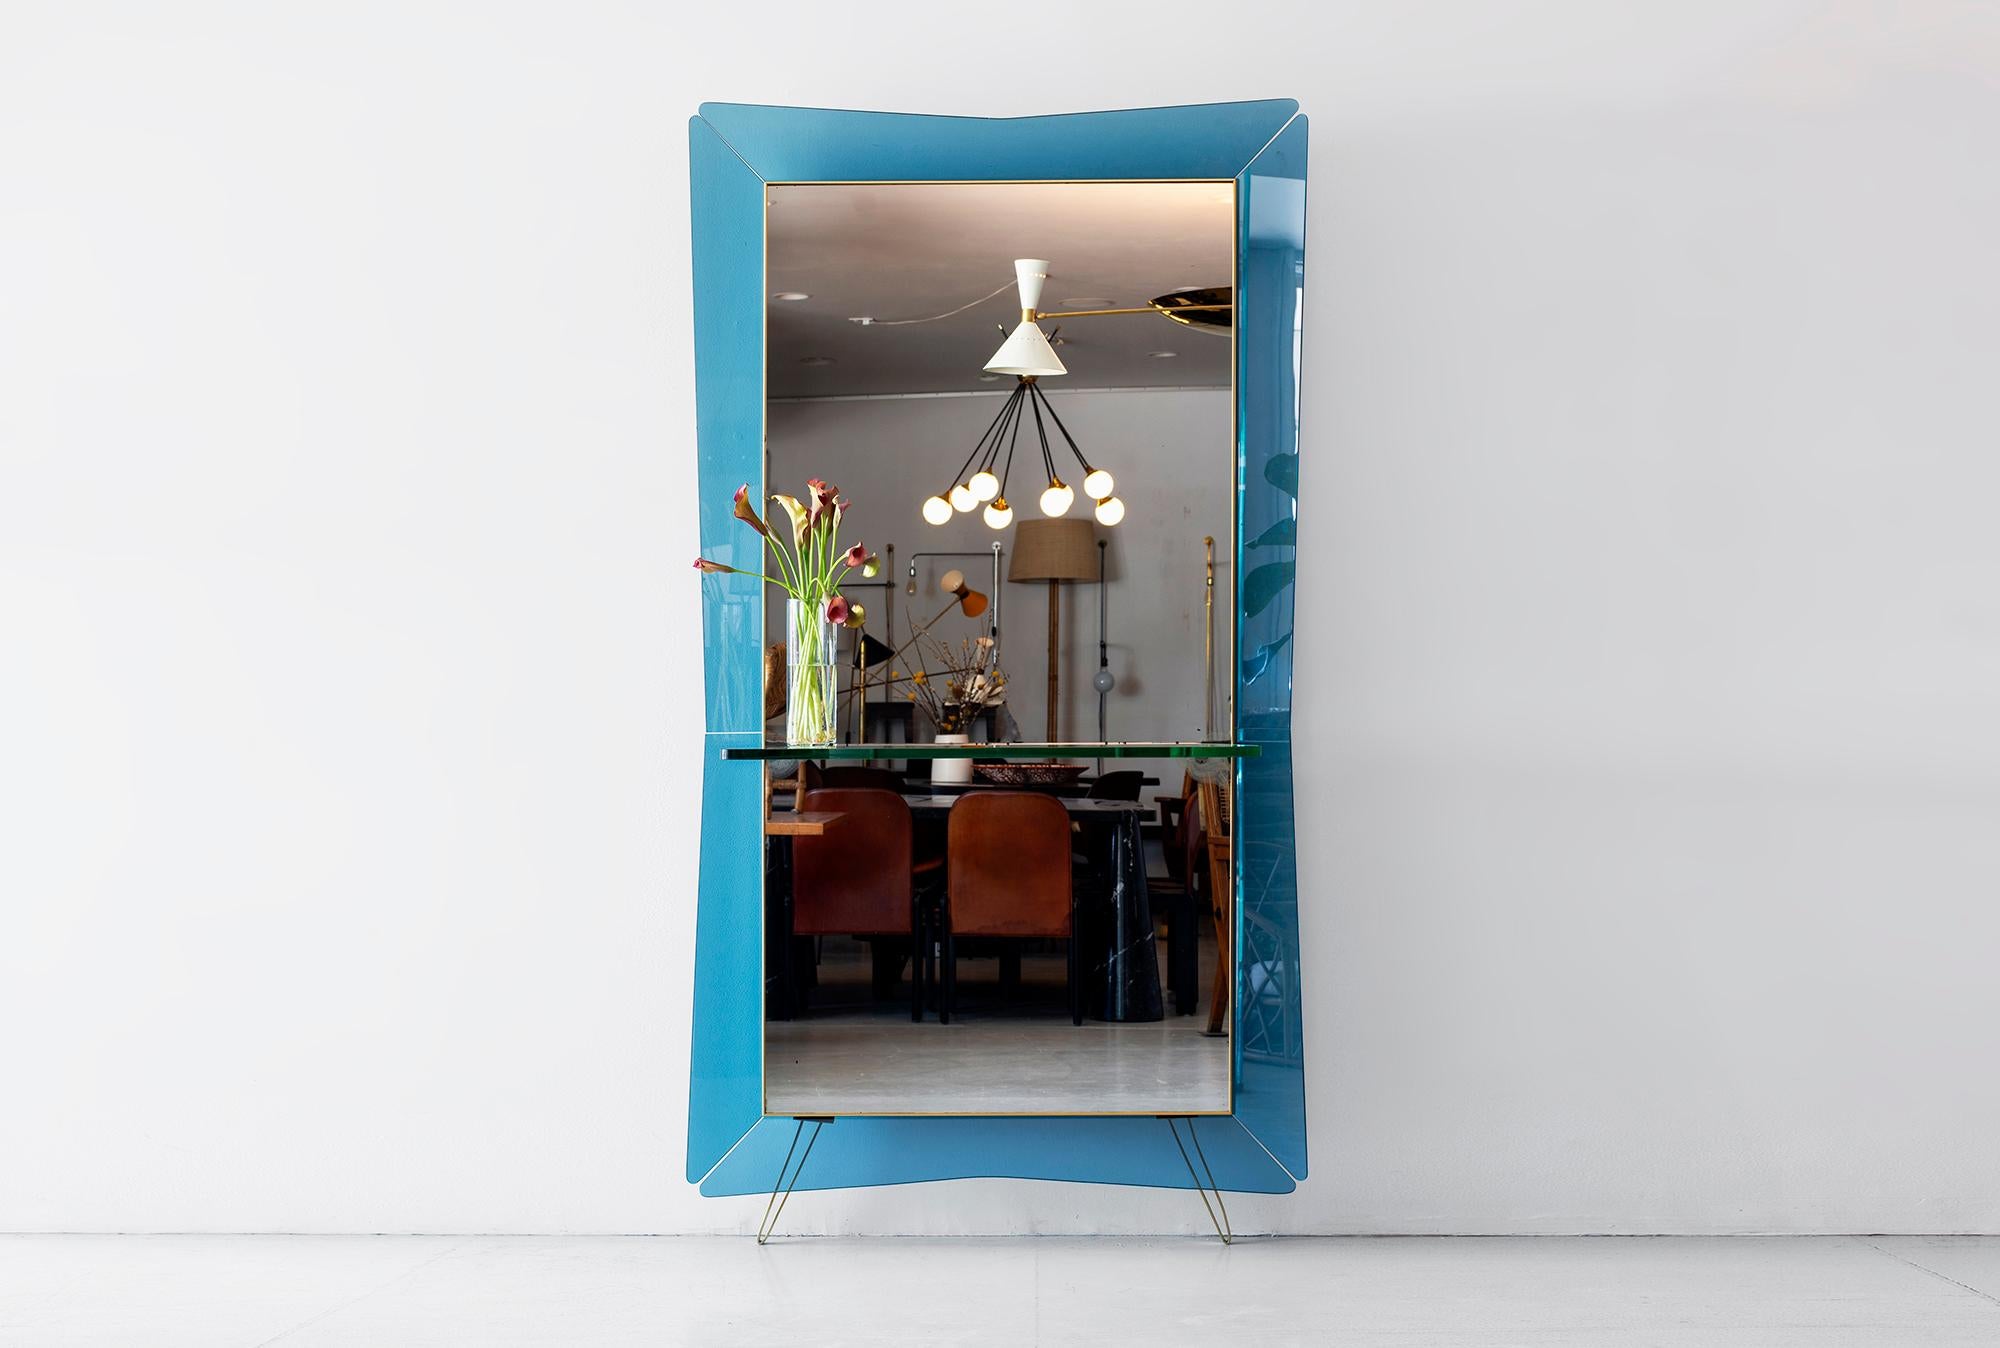 Giant Cristal art mirror with blue frame and glass console.
Brass loop legs.